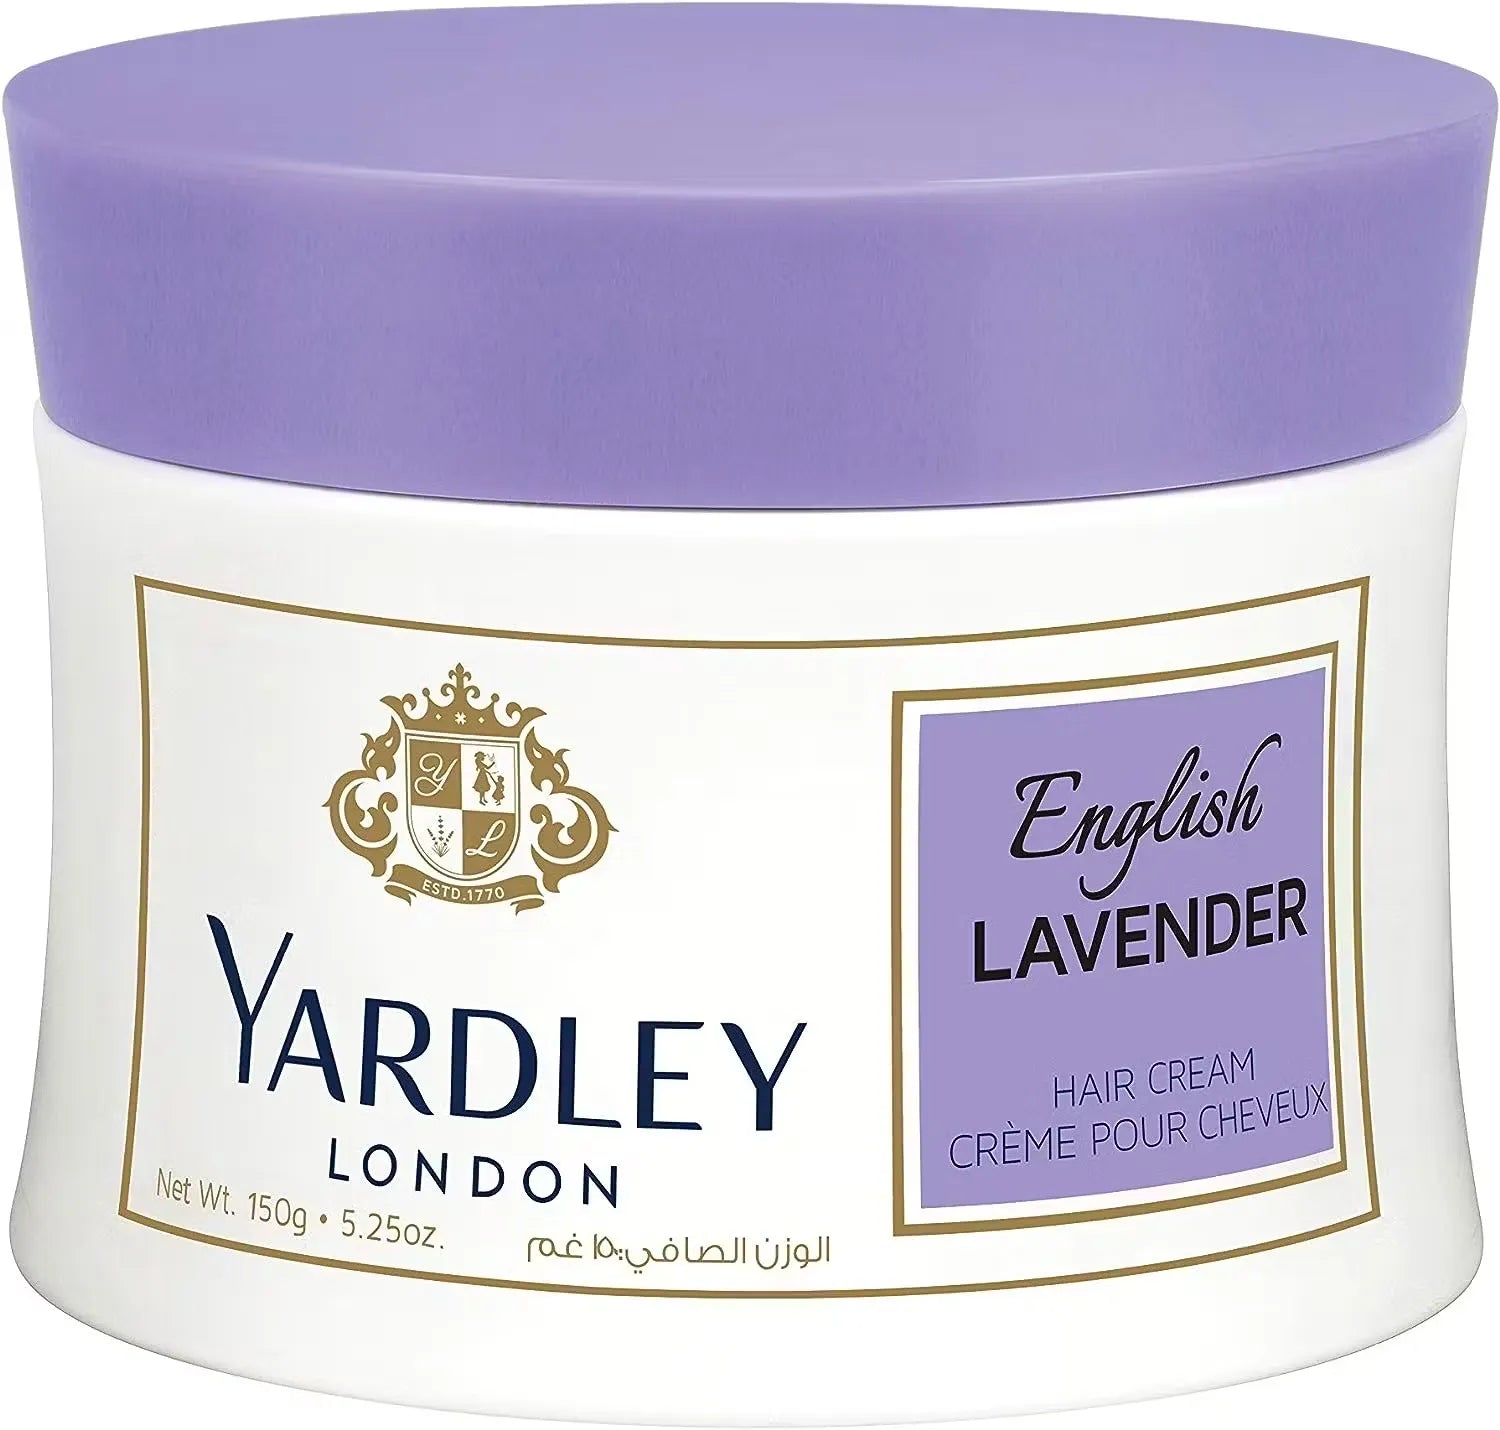 Yardley London Lavender Hair Cream (150g) nourishes and conditions hair, leaving it soft, manageable, and infused with a calming lavender scent. Shop on Dubailisit!